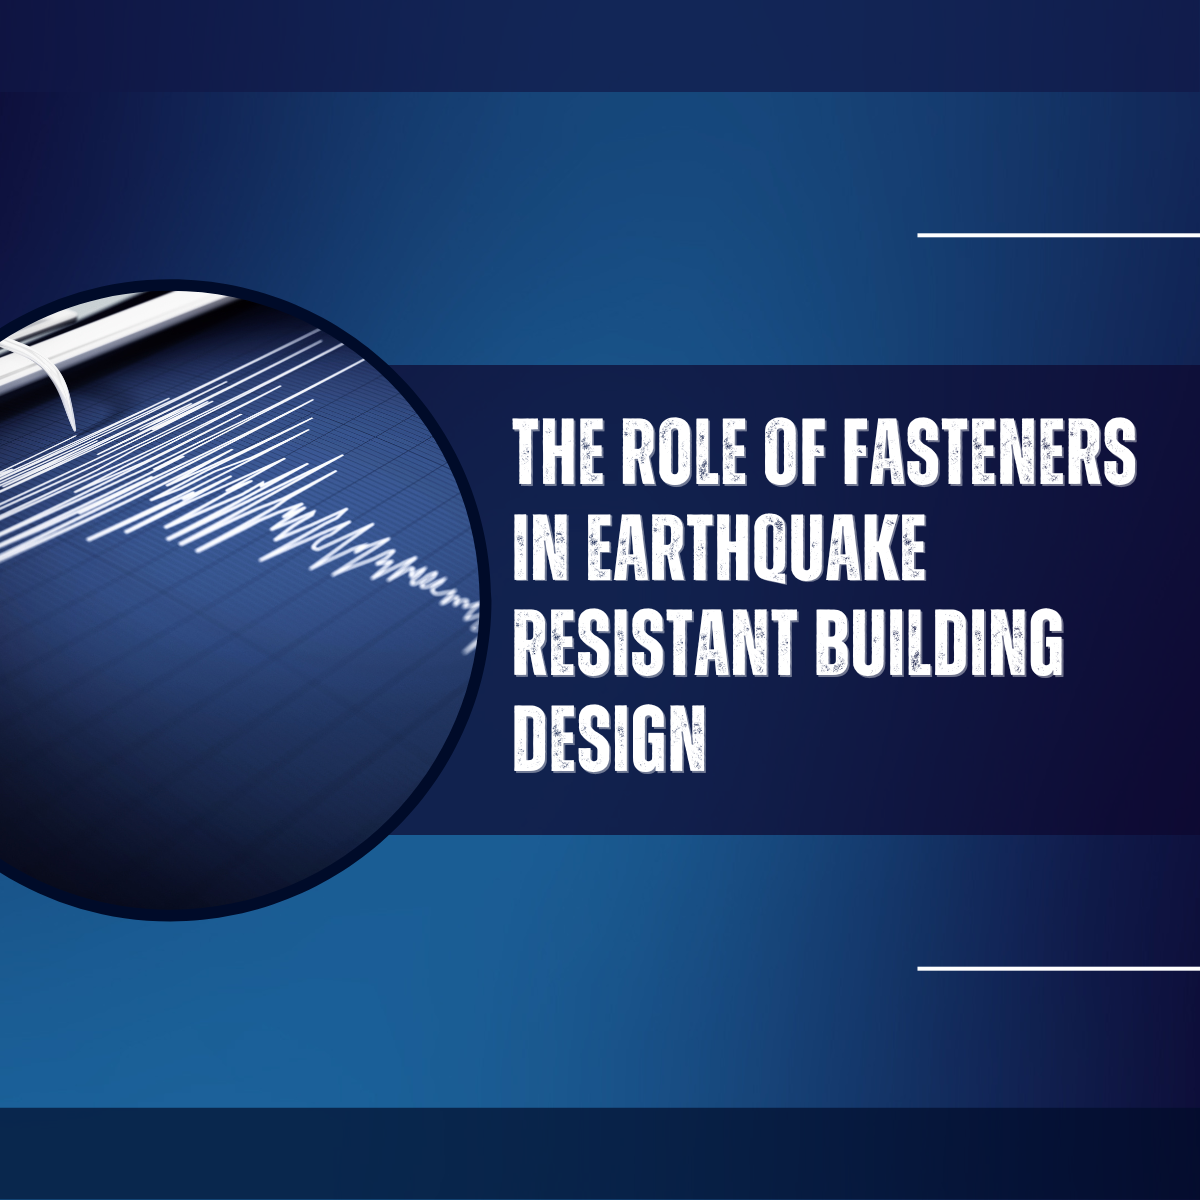 The Role Of Fasteners In Earthquake-Resistant Building Design 